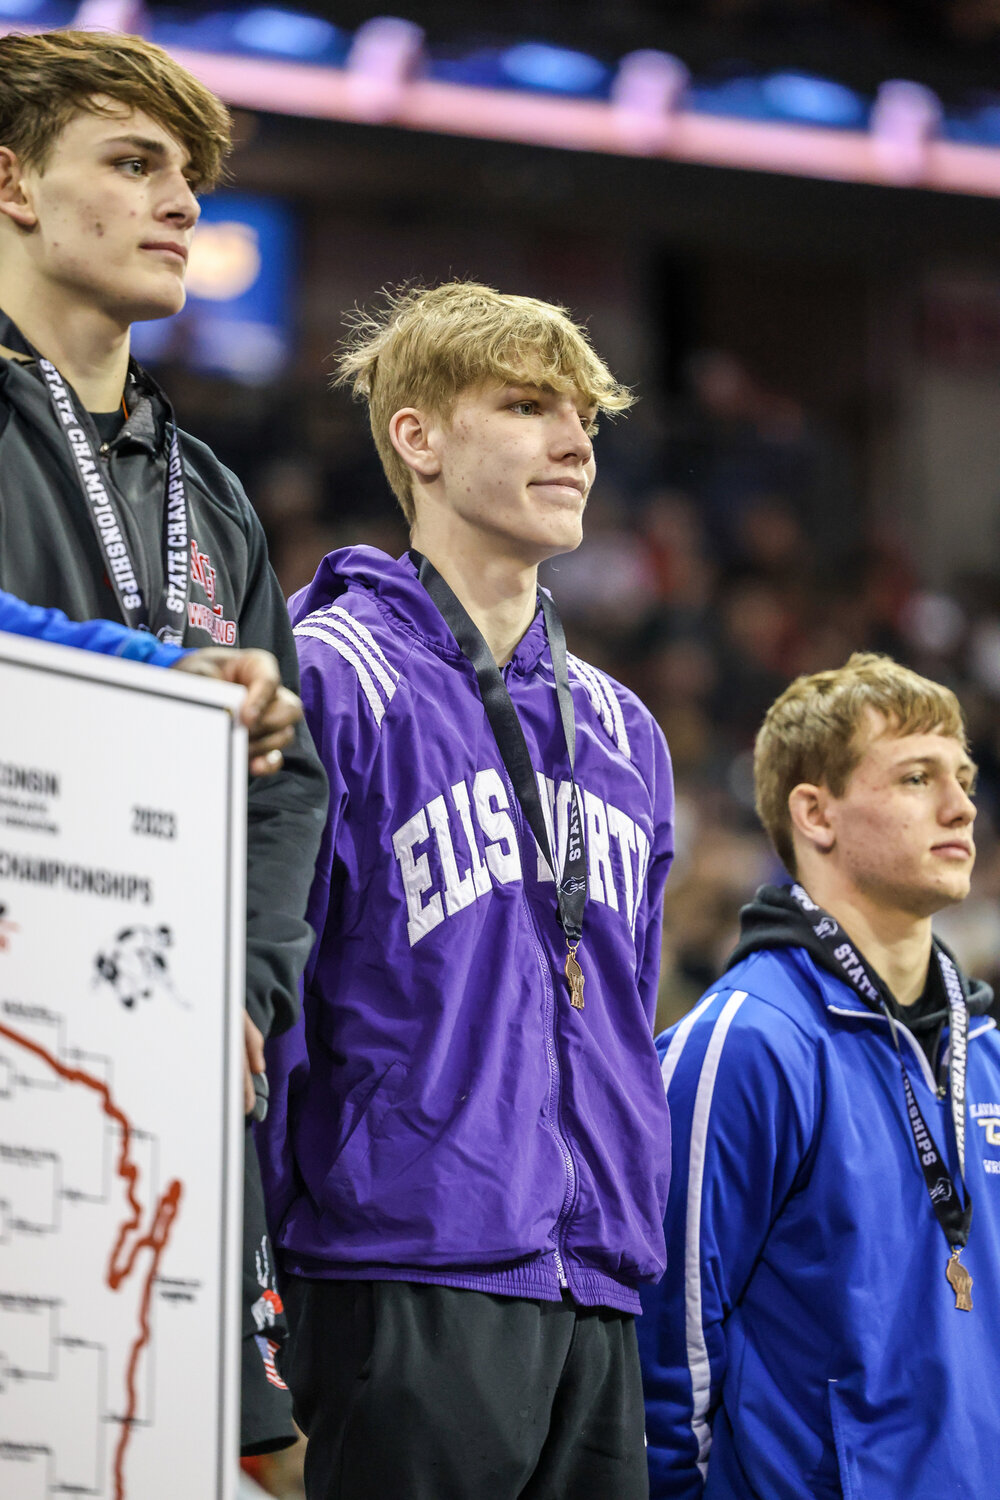 Panther wrestler Willy Penn earned a fourth-place medal at the state tournament in Madison last year. Head Coach Mark Matzek credits his hard work ethic.